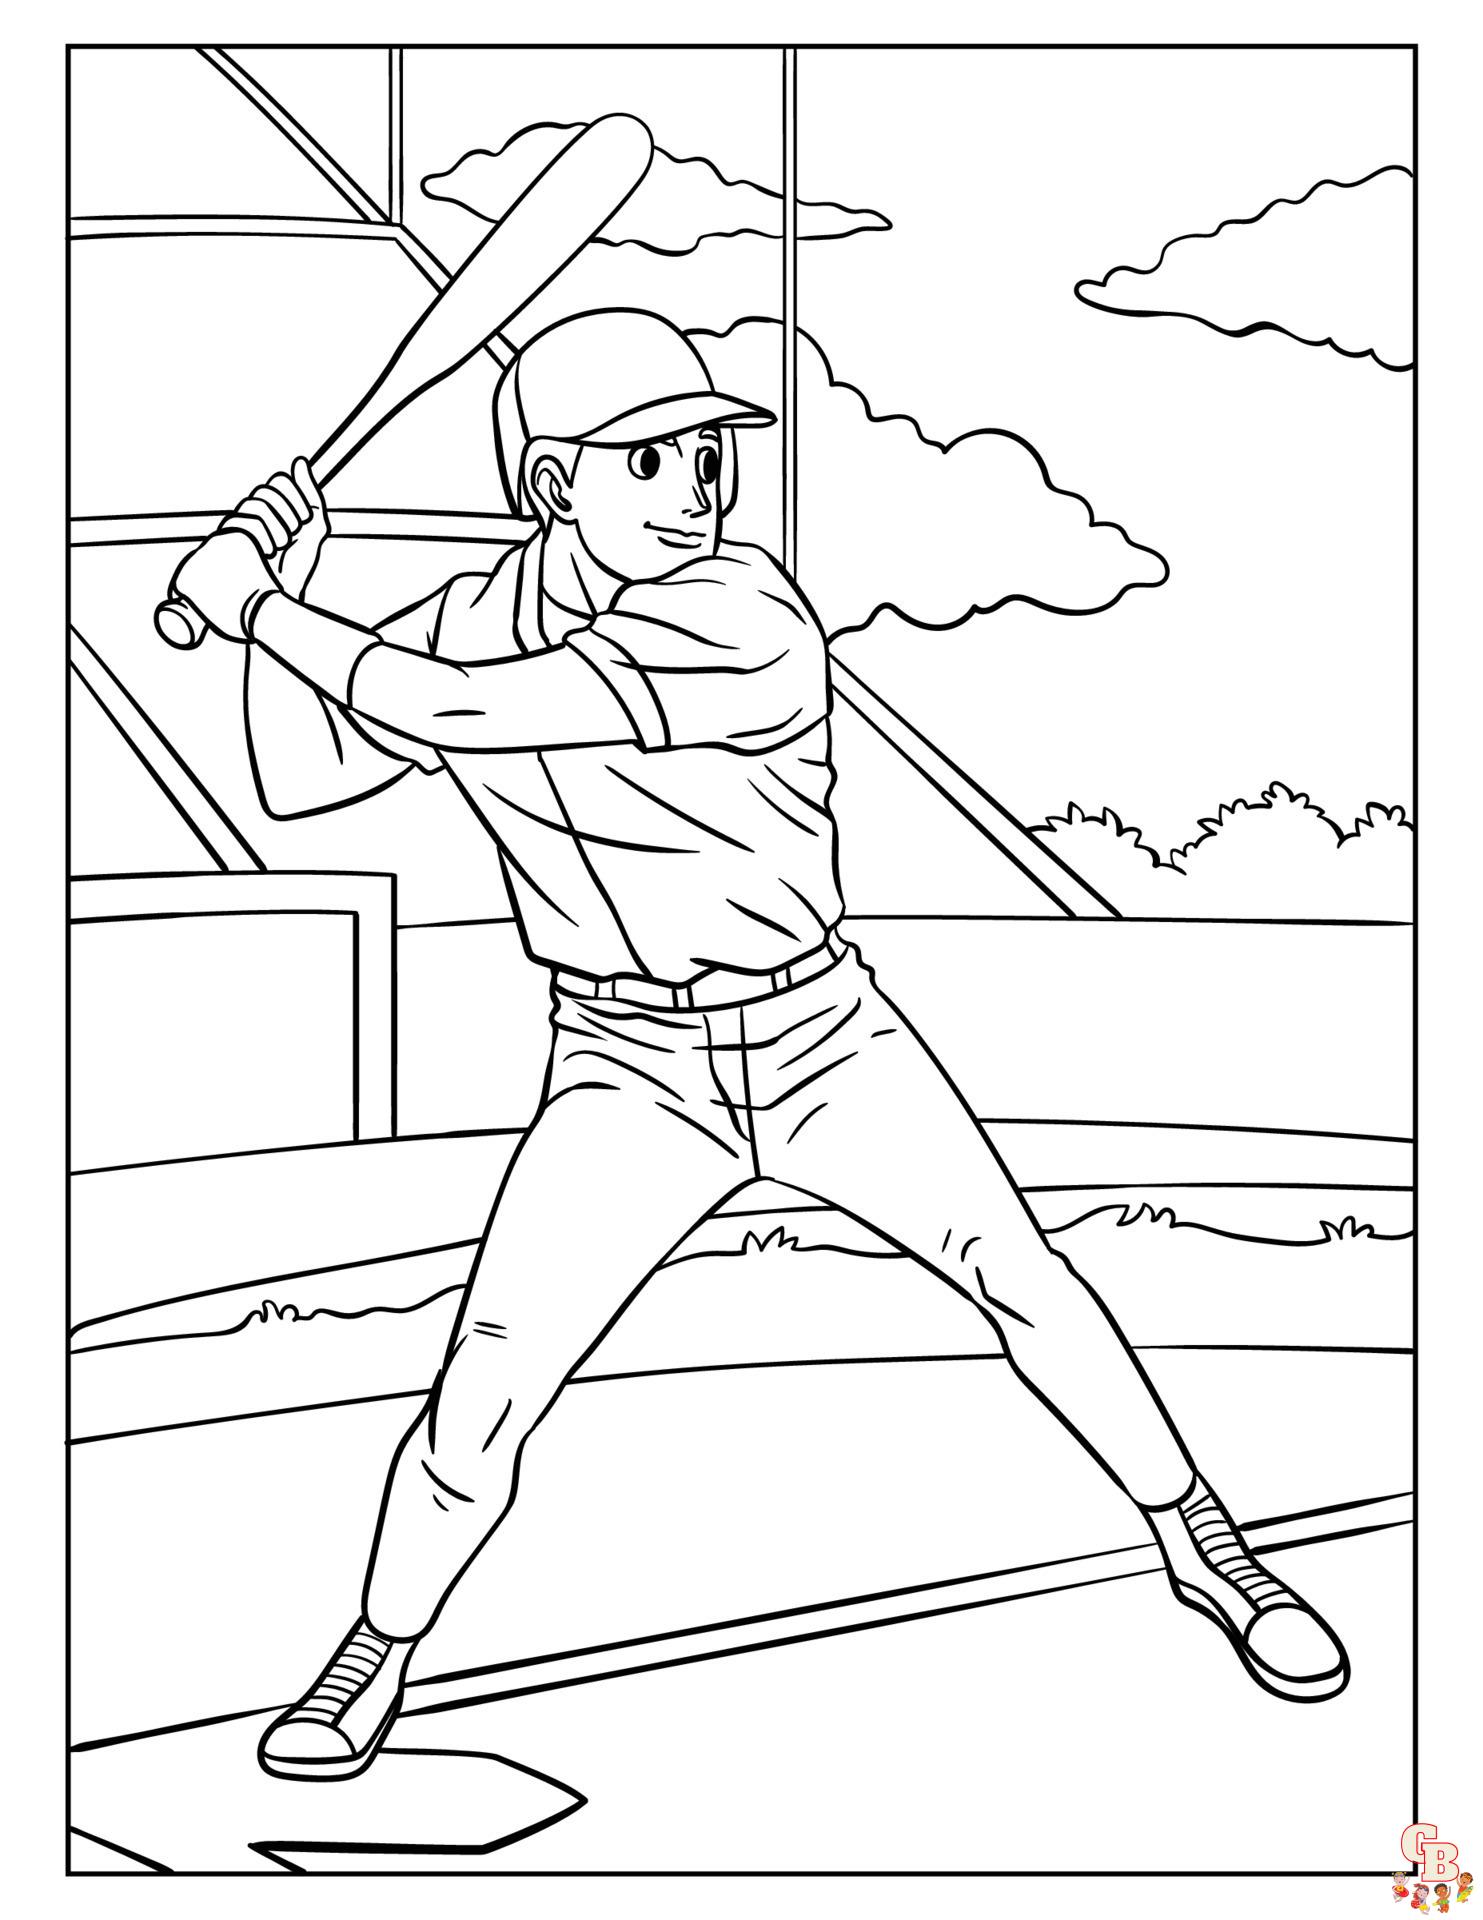 Baseball Coloring Pages 5